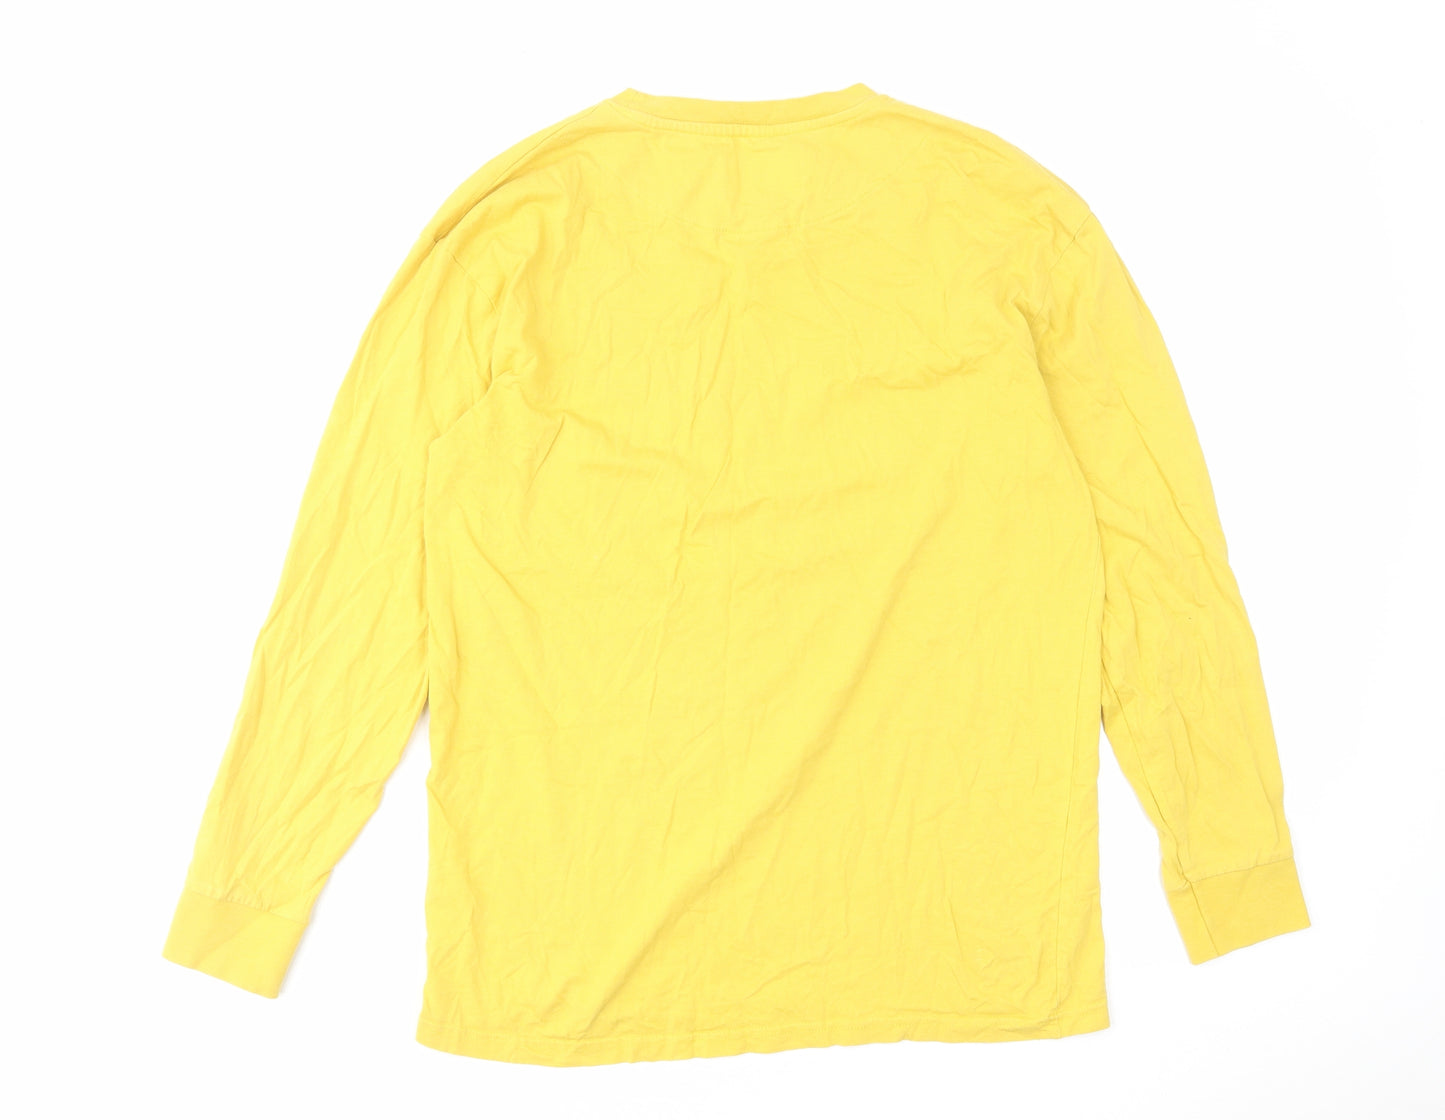 Afterjam Mens Yellow Cotton T-Shirt Size S Crew Neck